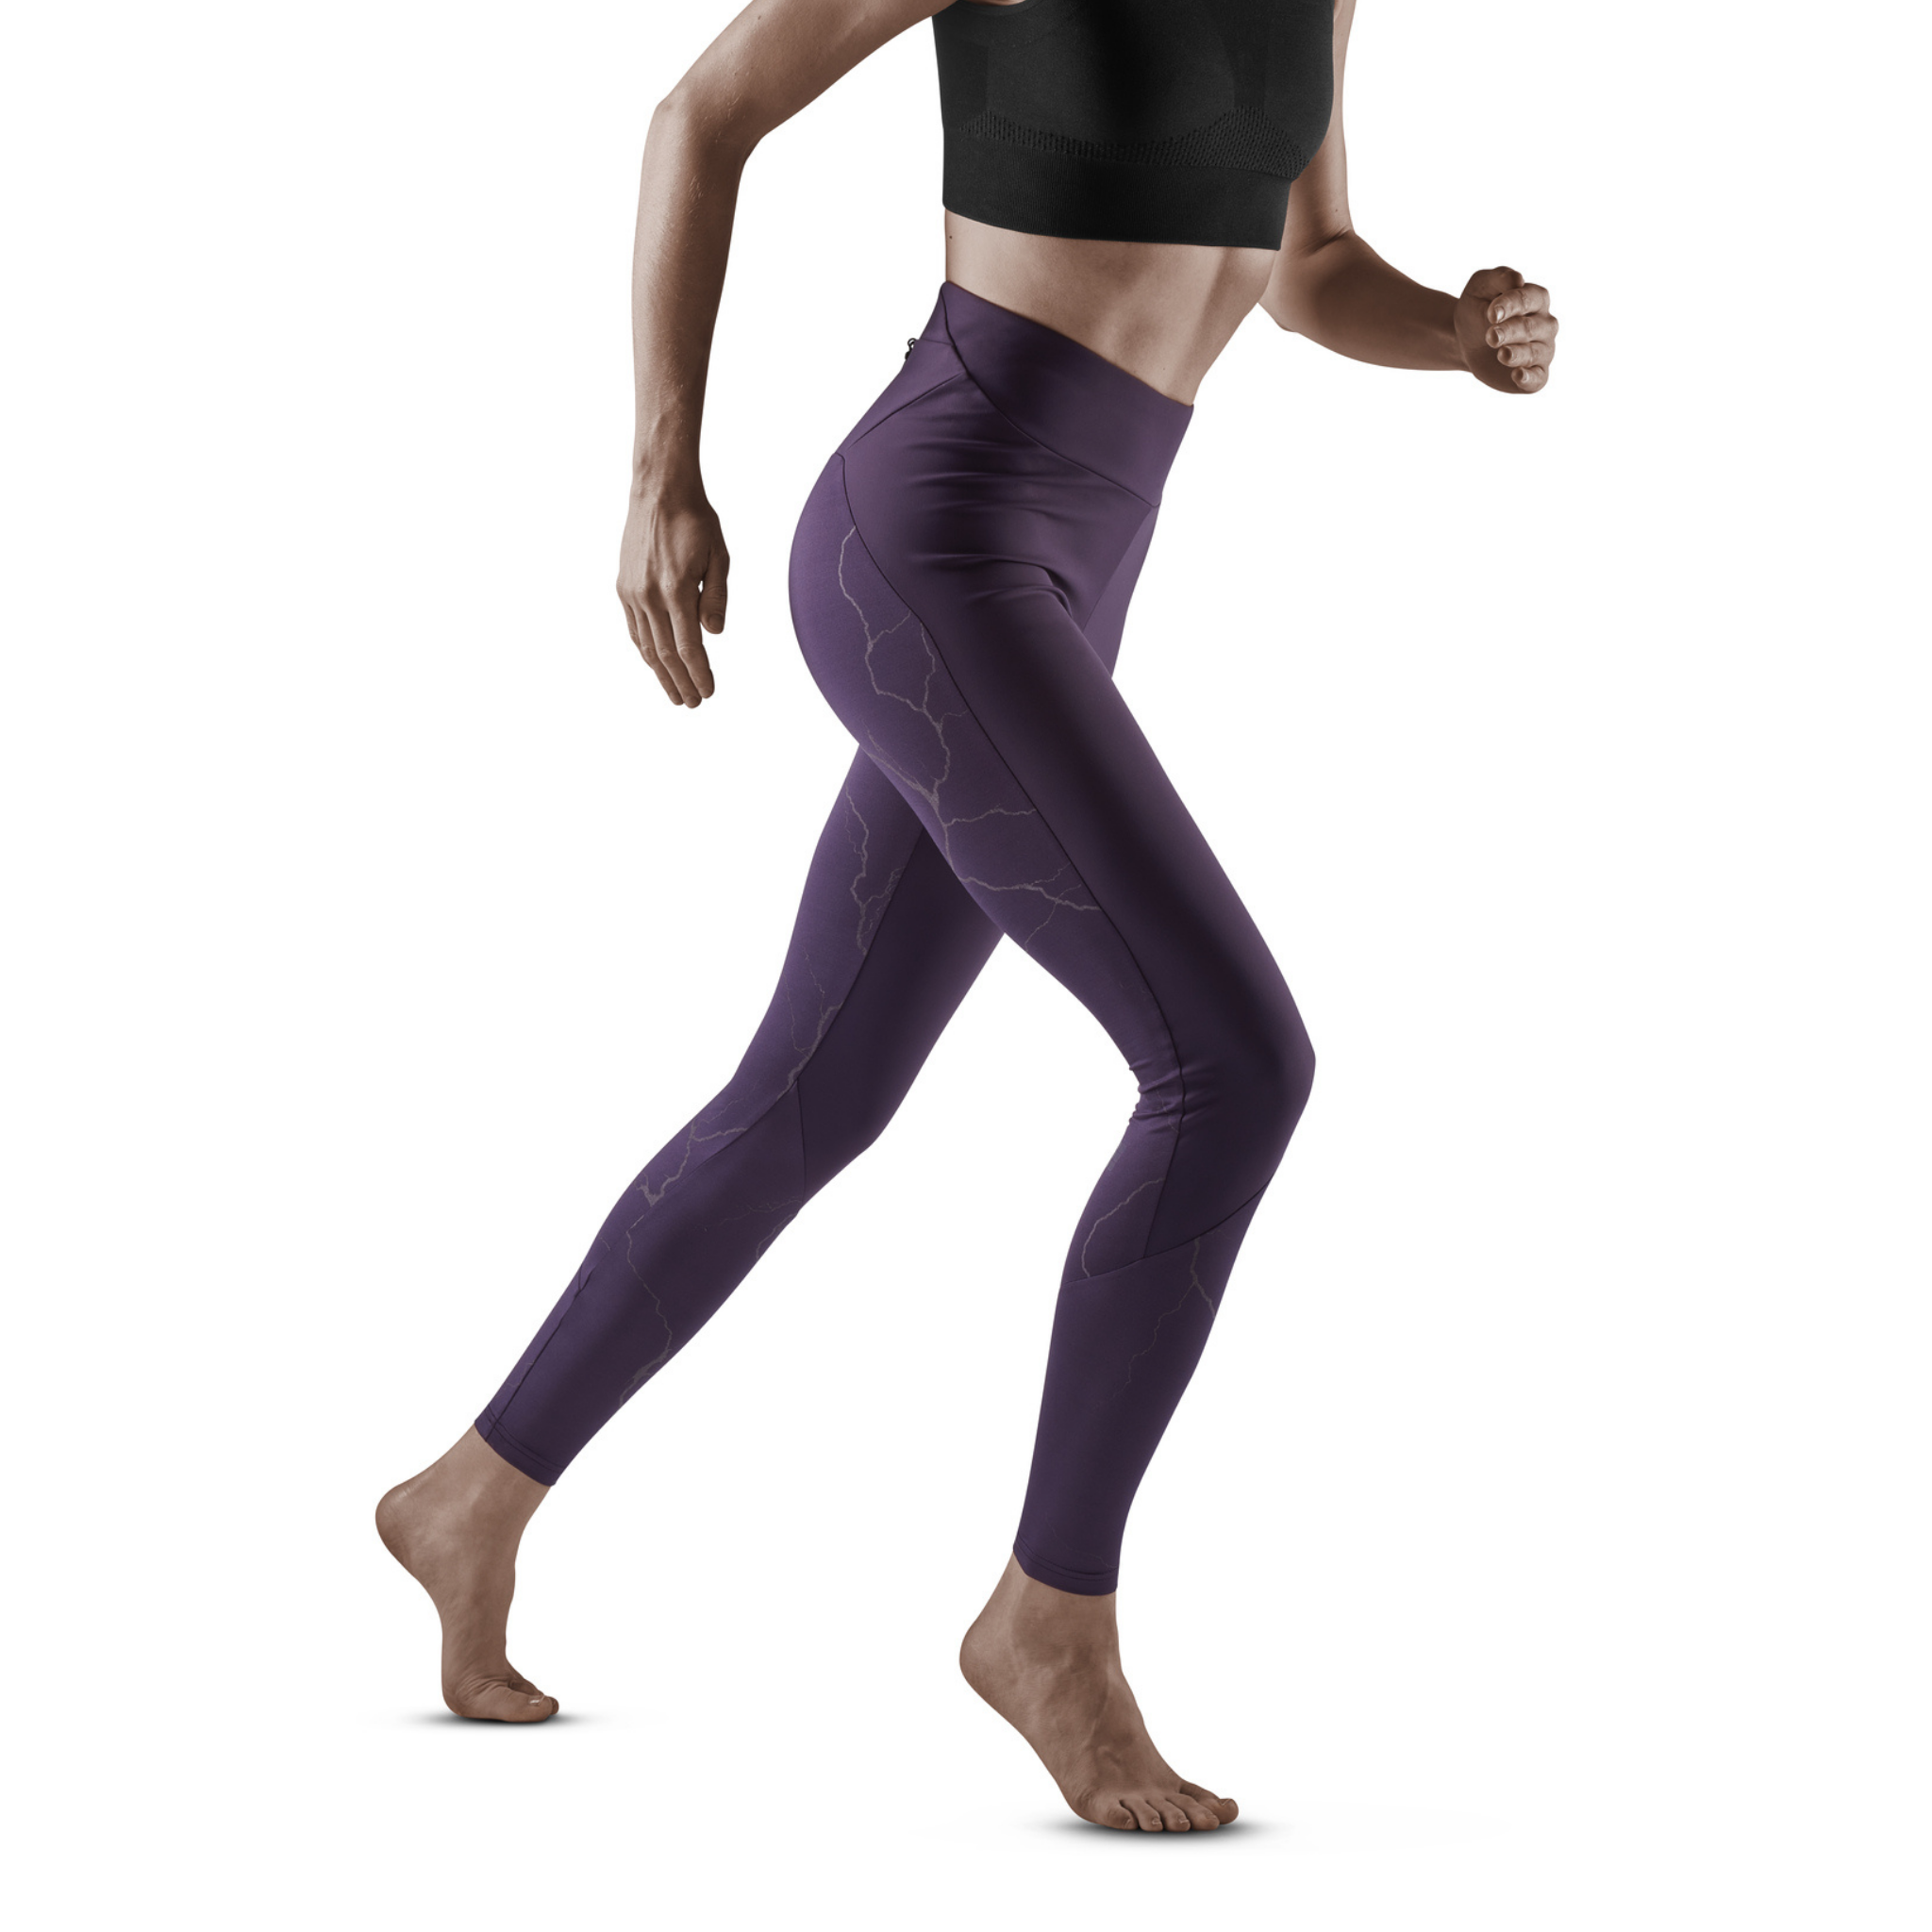 CEP Activating Sportswear - sportswear with and without